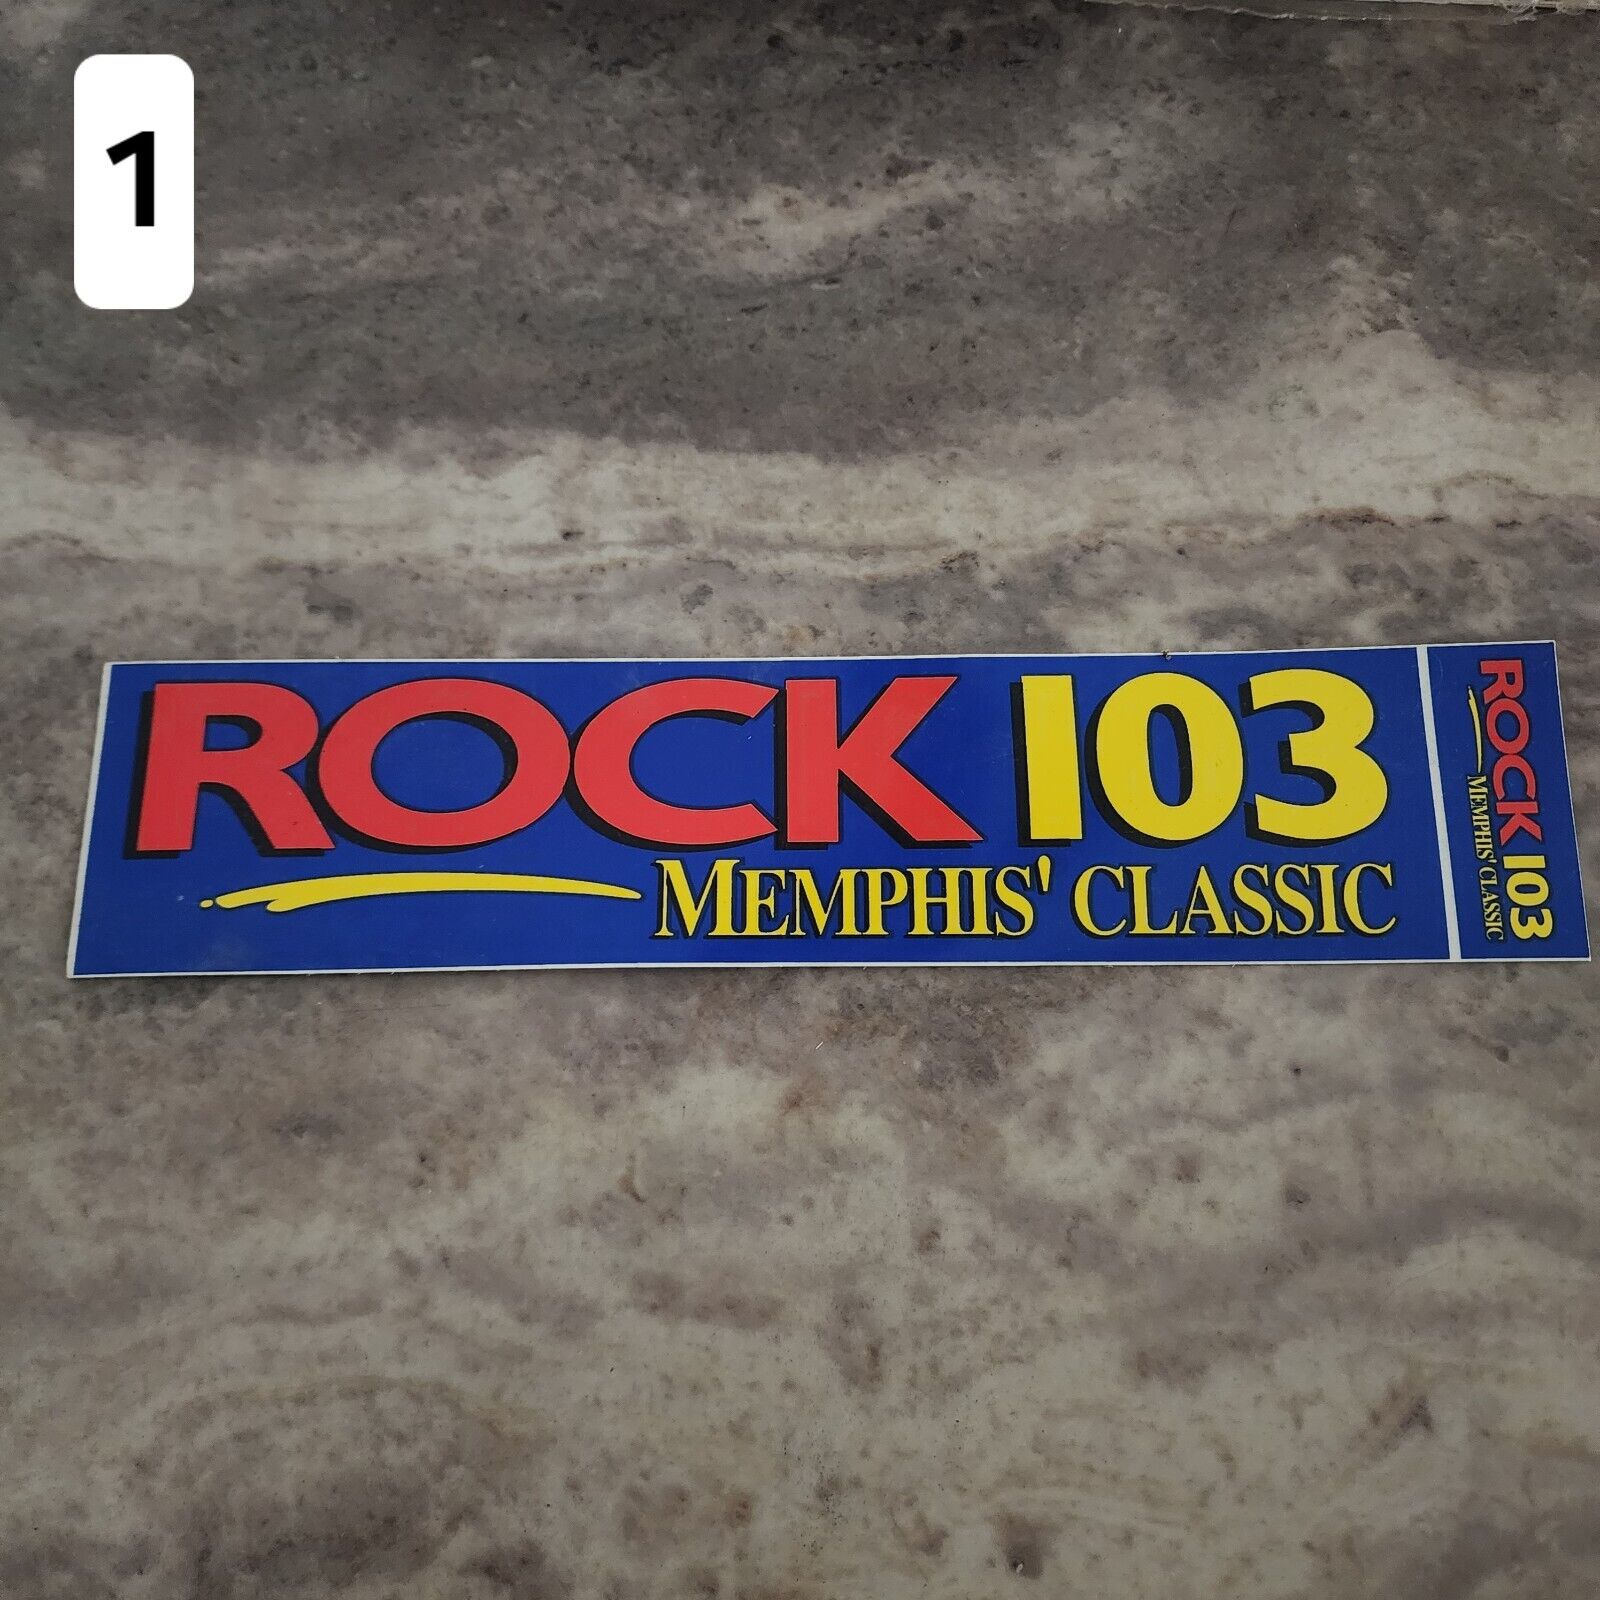 Classic ROCK 103, EAGLE, 96X Memphis Radio Station Stickers from 1980s-90s Era.